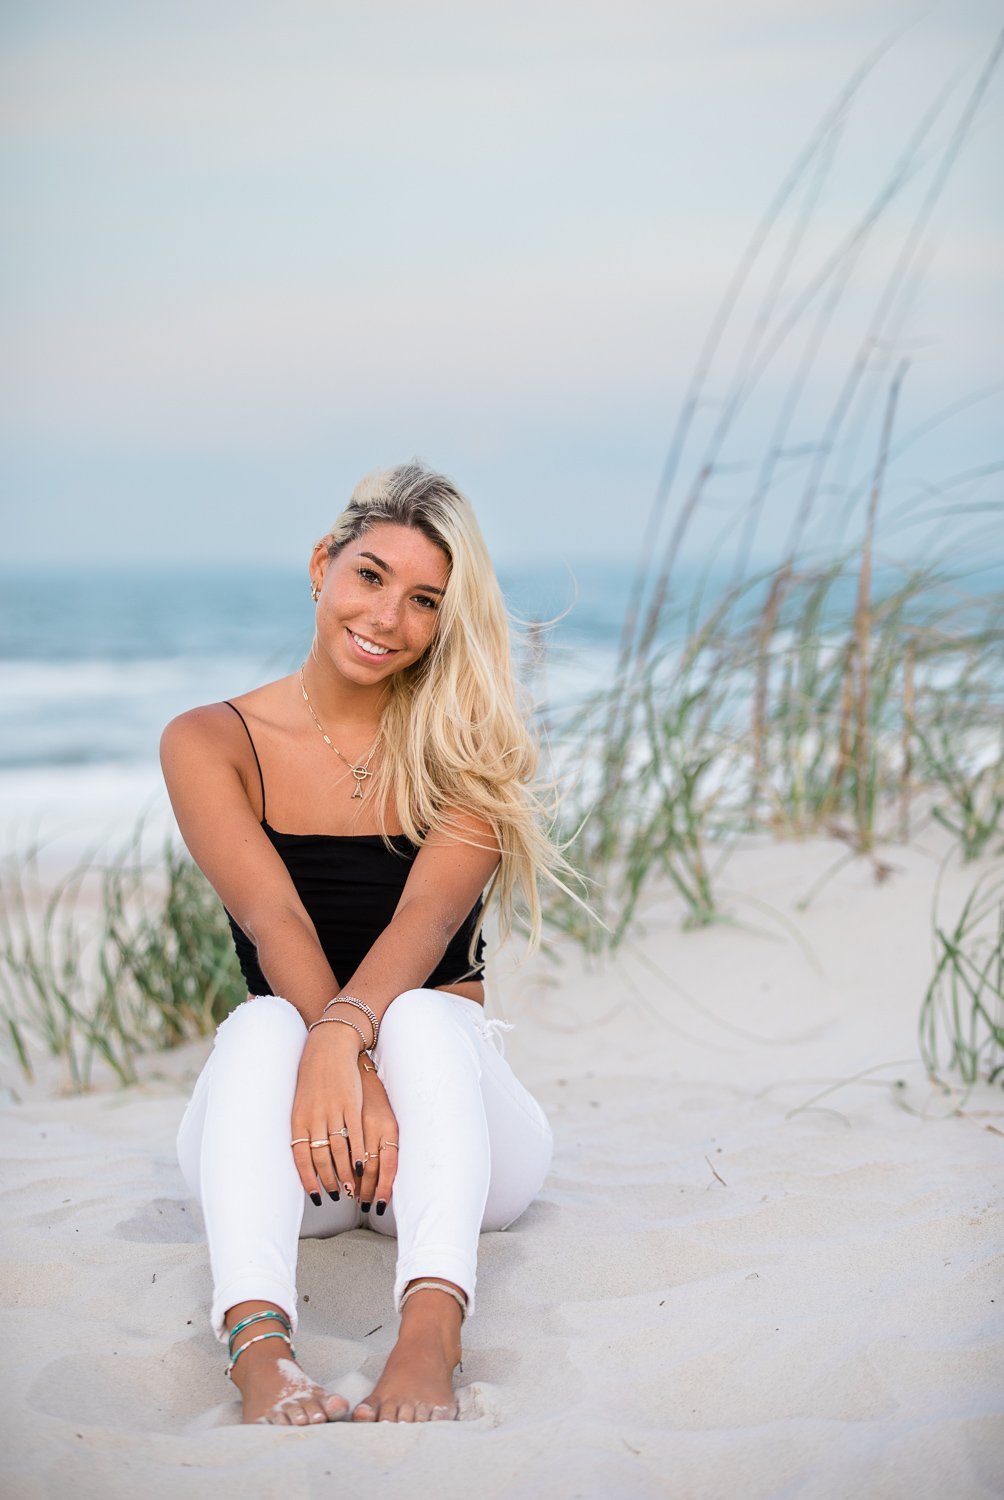 Sunset beach senior photos picture ideas for yearbook